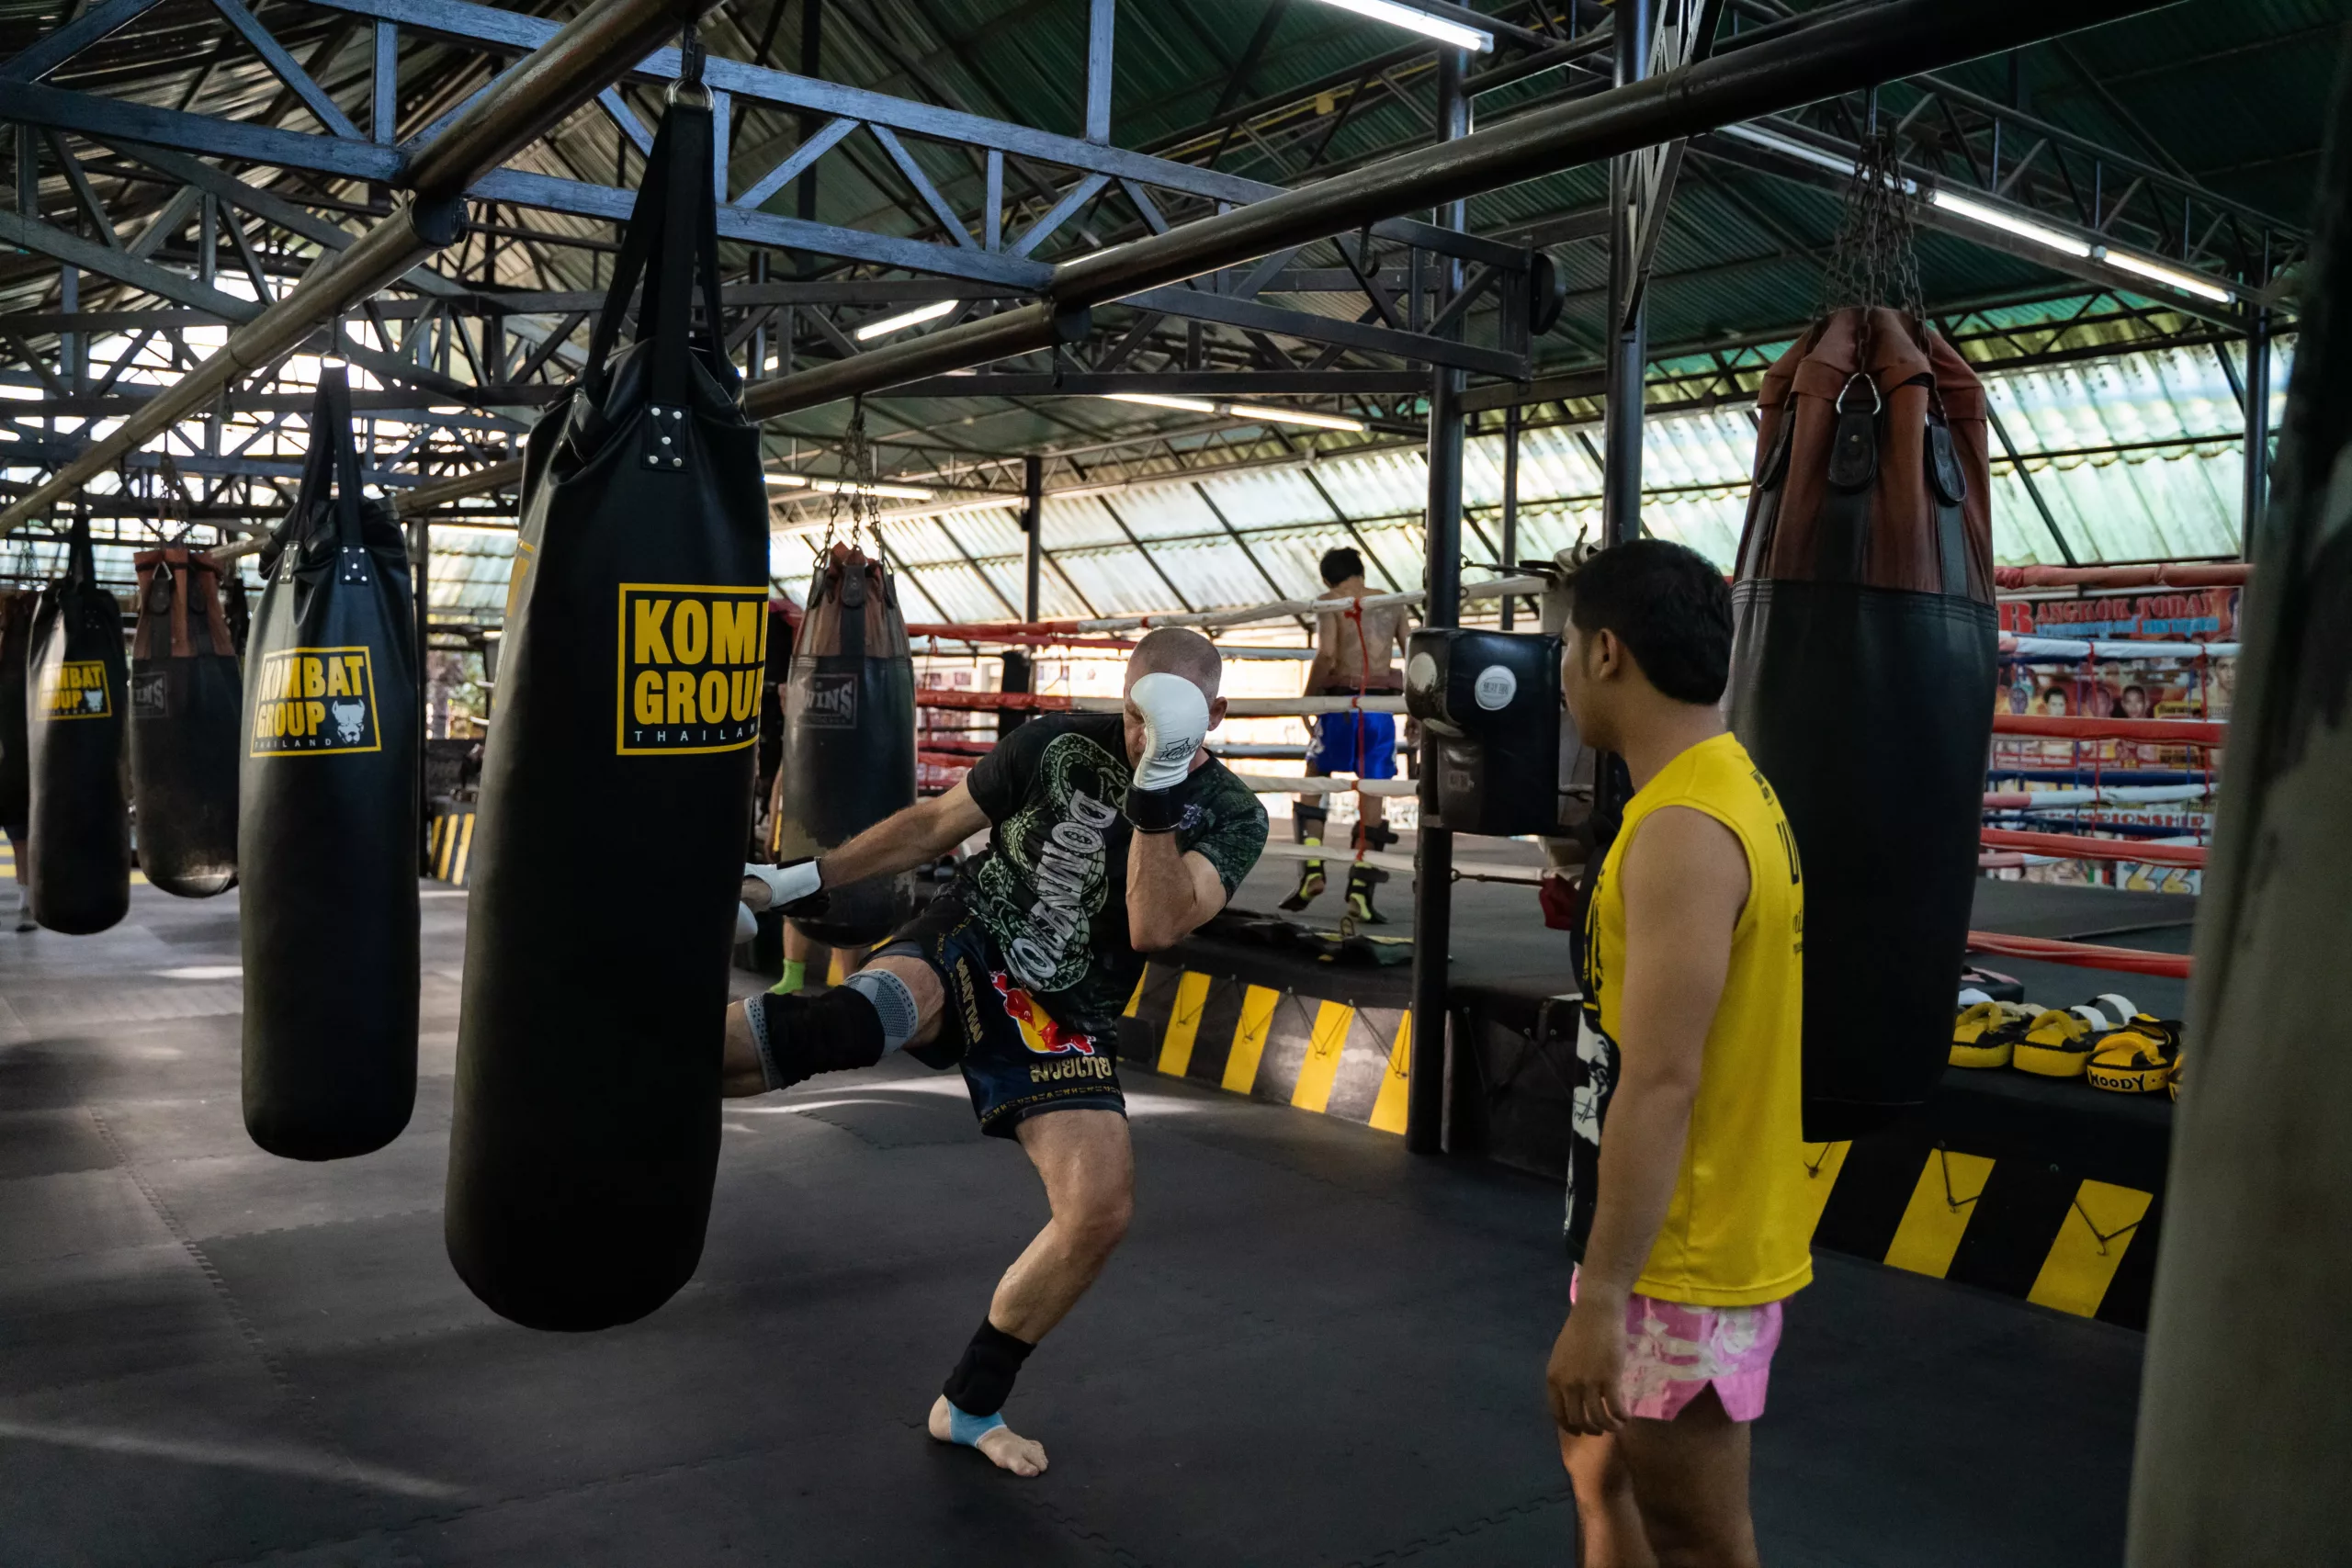 An athlete in Muay Thai shorts is captured in mid-kick against a heavy bag, with a focused trainer observing, in a spacious gym with multiple punching bags and a boxing ring in the background.